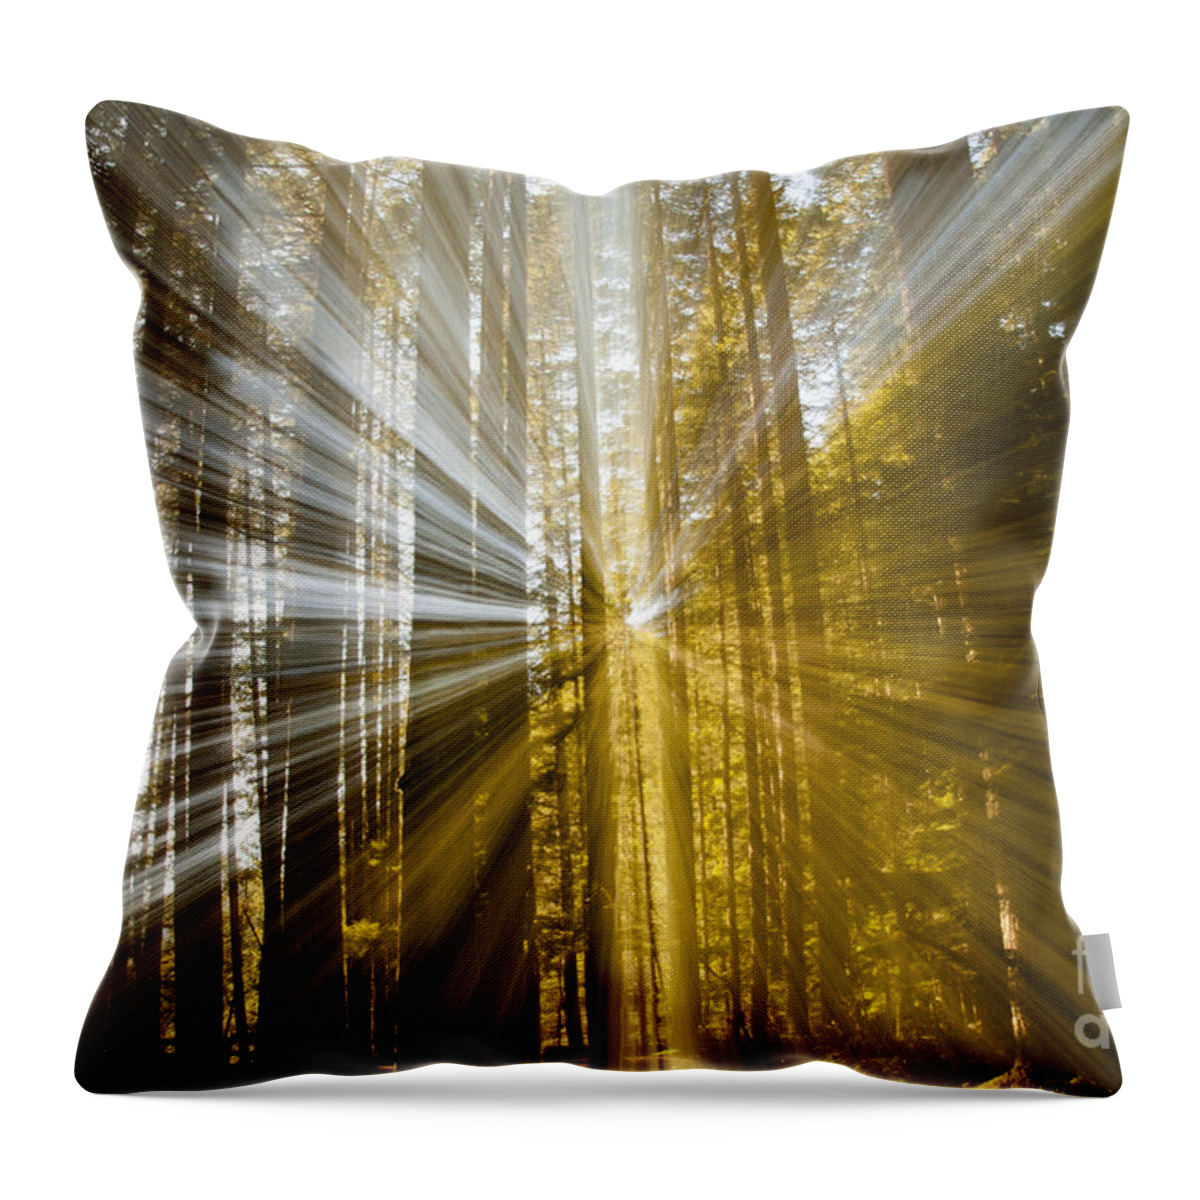 Forest Throw Pillow featuring the photograph Forest Abstract by Vivian Christopher